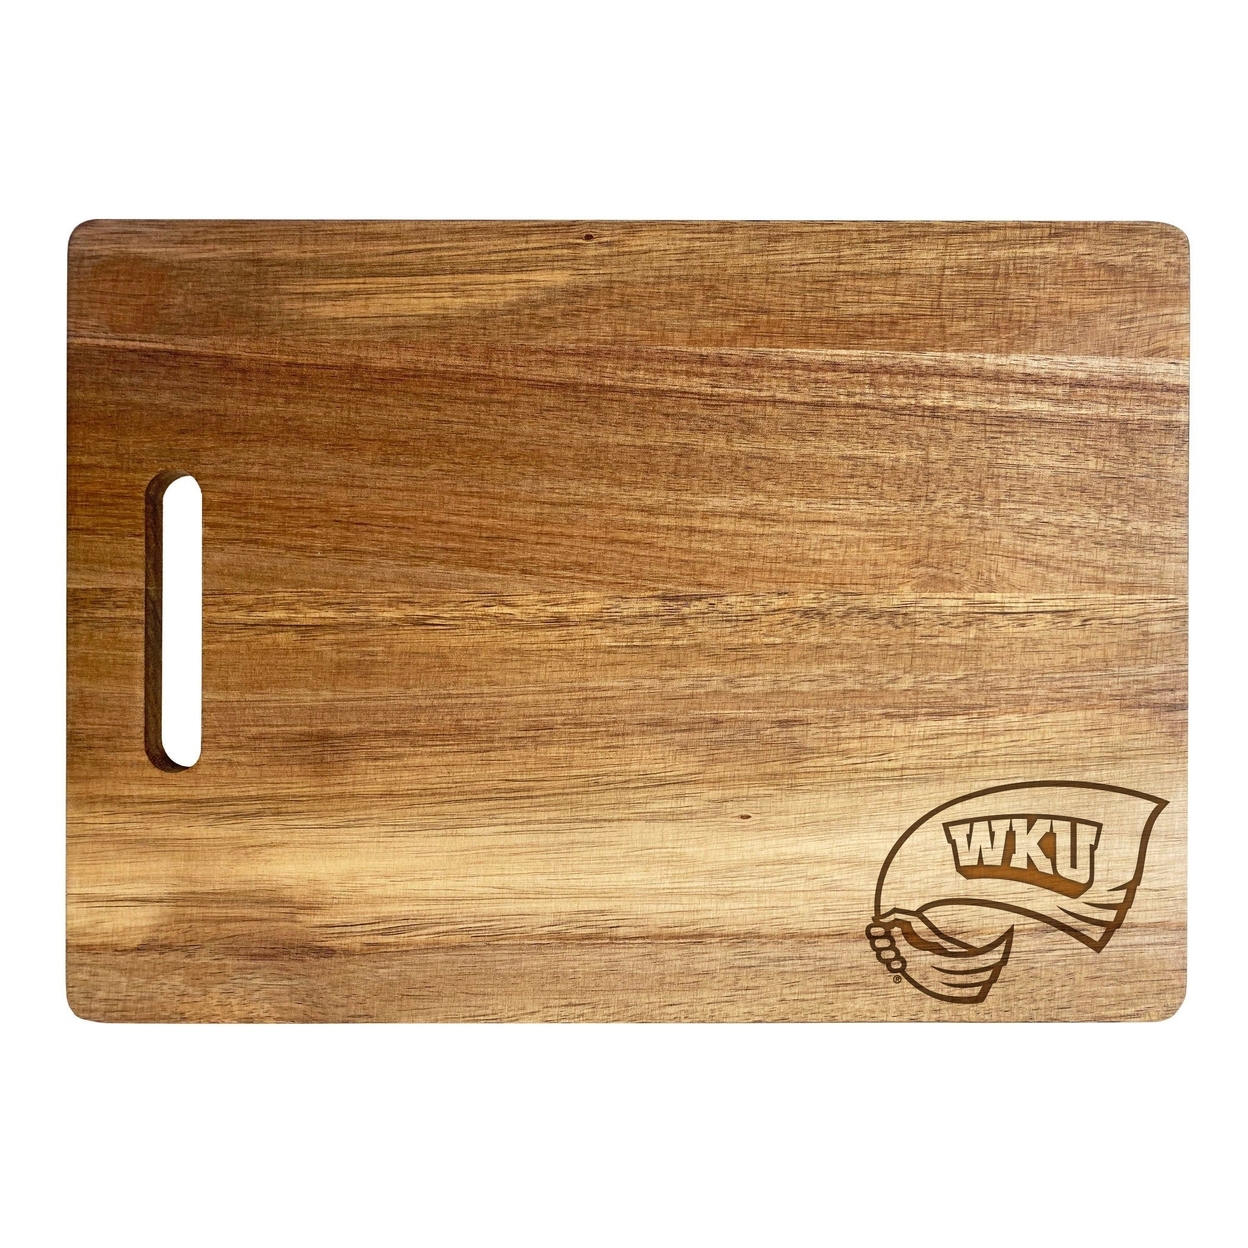 Western Kentucky Hilltoppers Engraved Wooden Cutting Board 10 X 14 Acacia Wood - Small Engraving